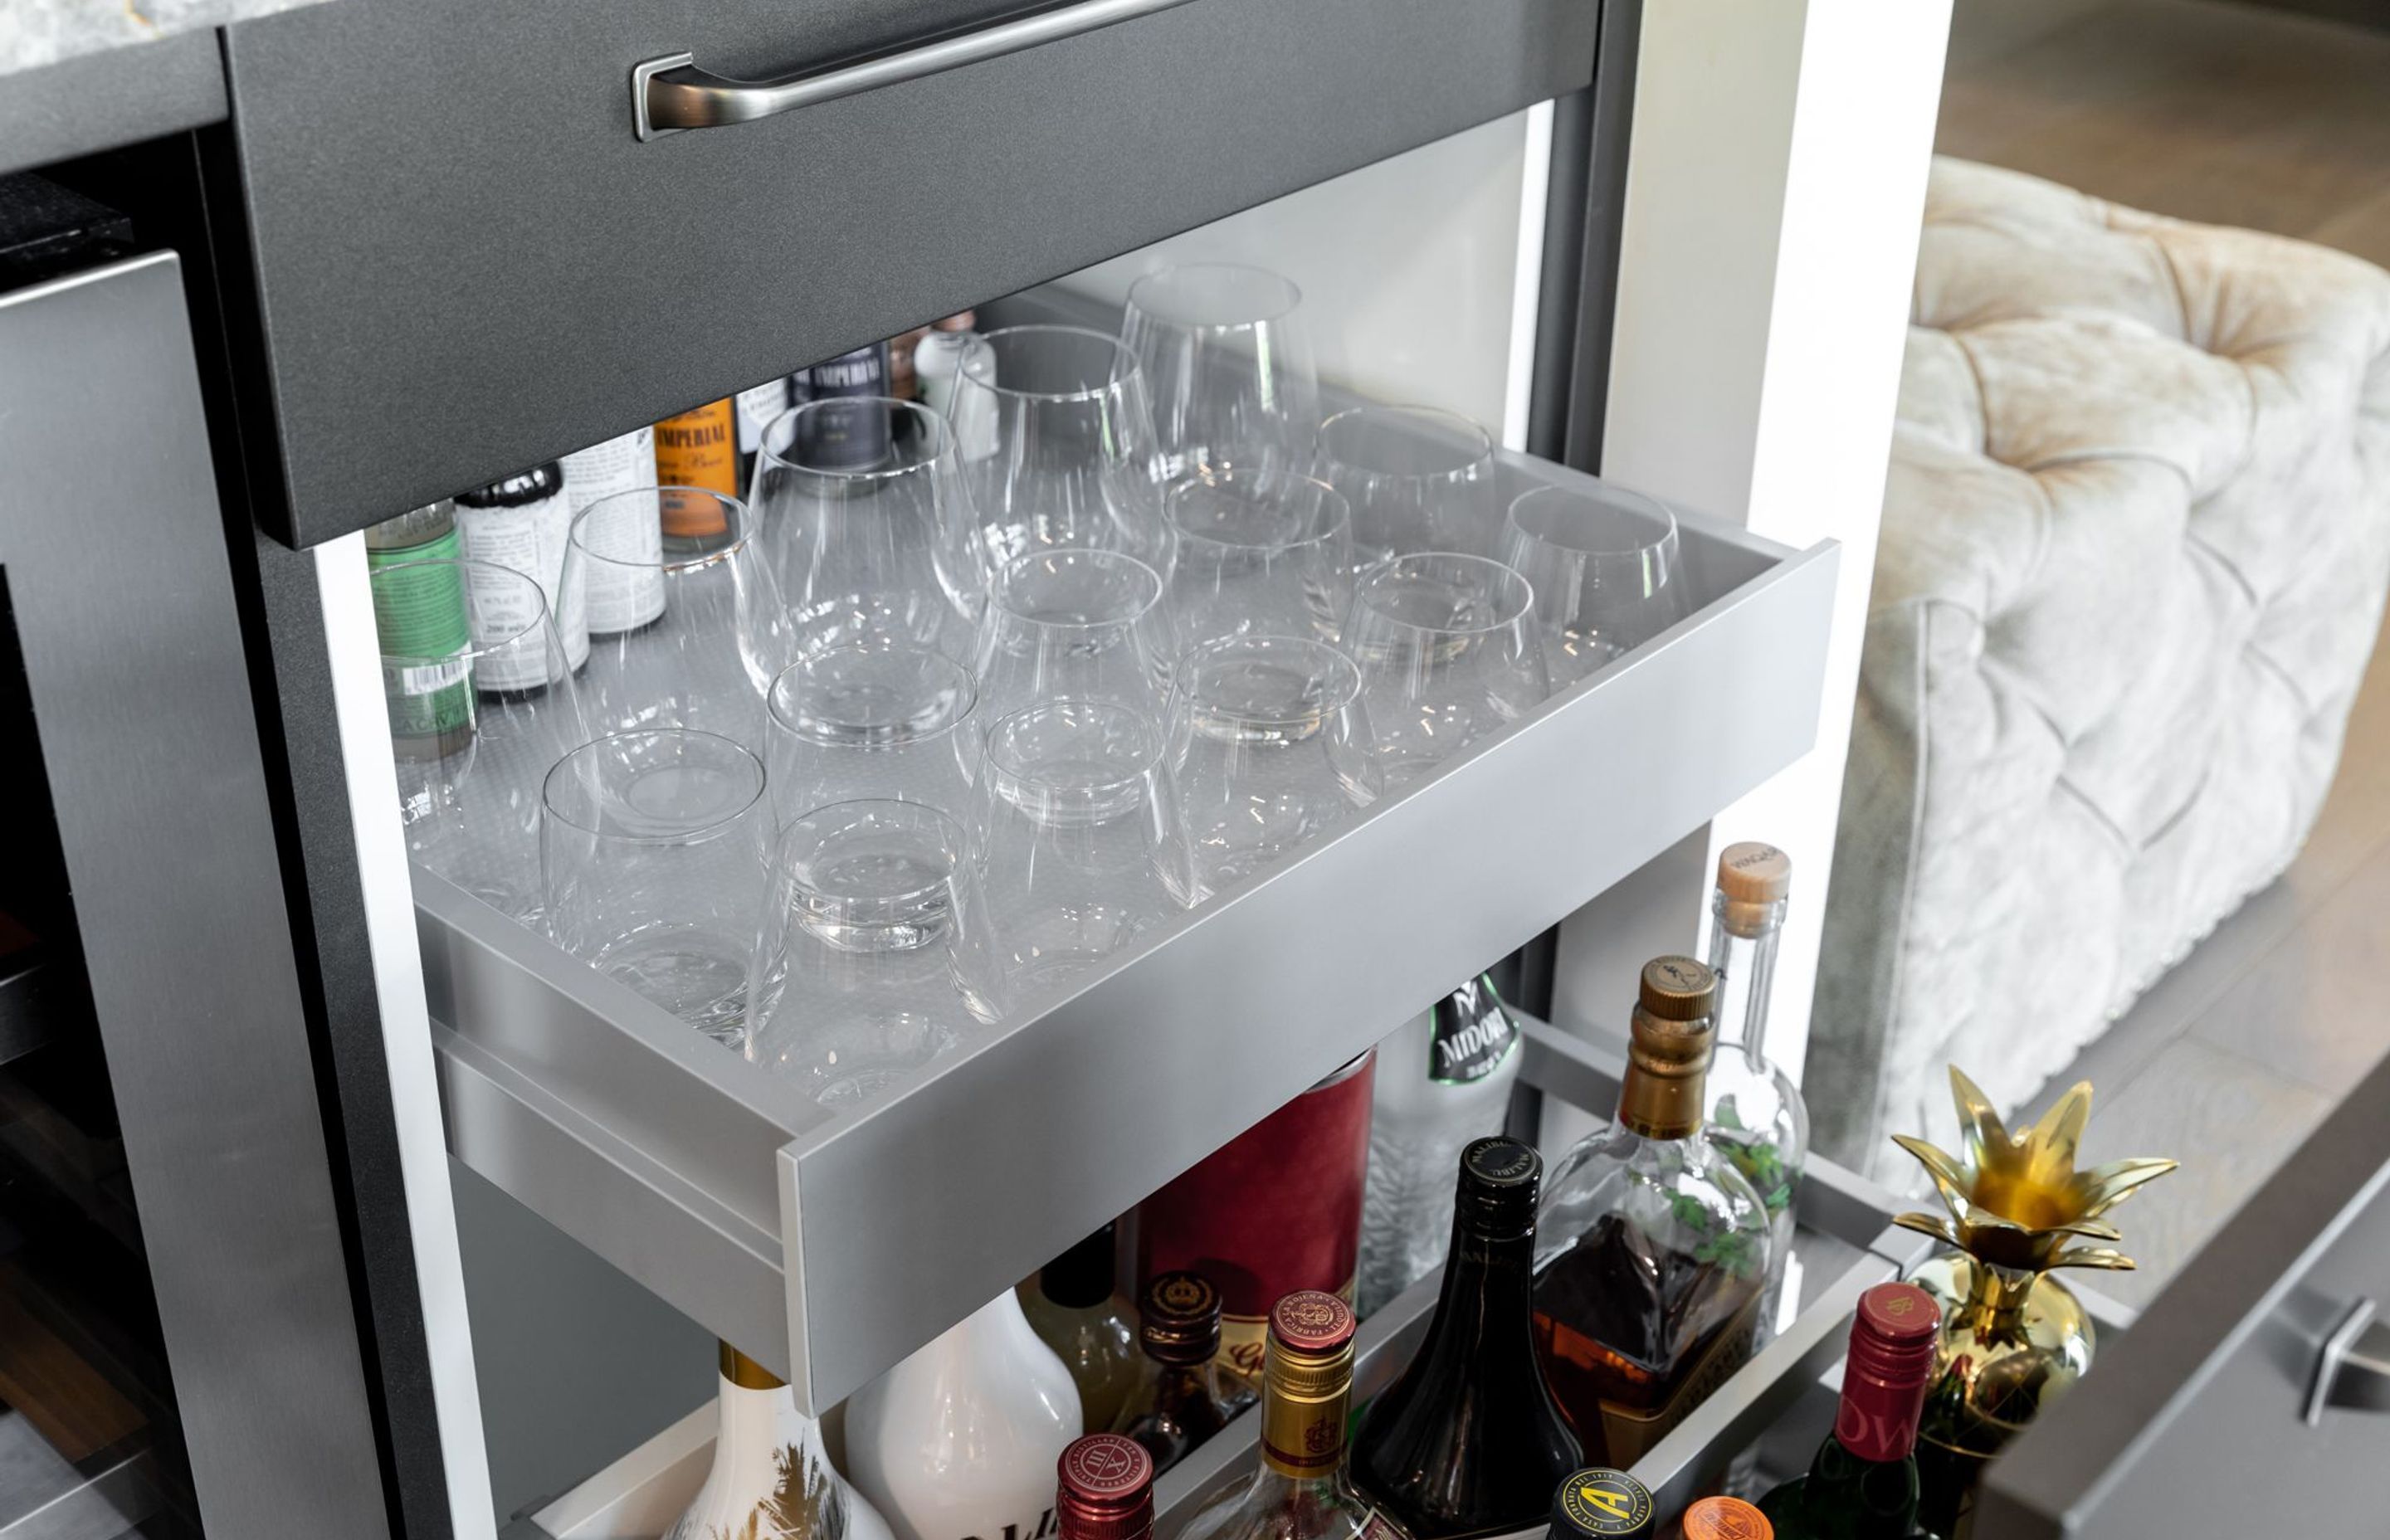 Clever storage features were integrated throughout the kitchen. Spirits, mixers and glasses are easily accessible beneath the Bar with full-extension Grass NovaPro drawer runners by Häfele.